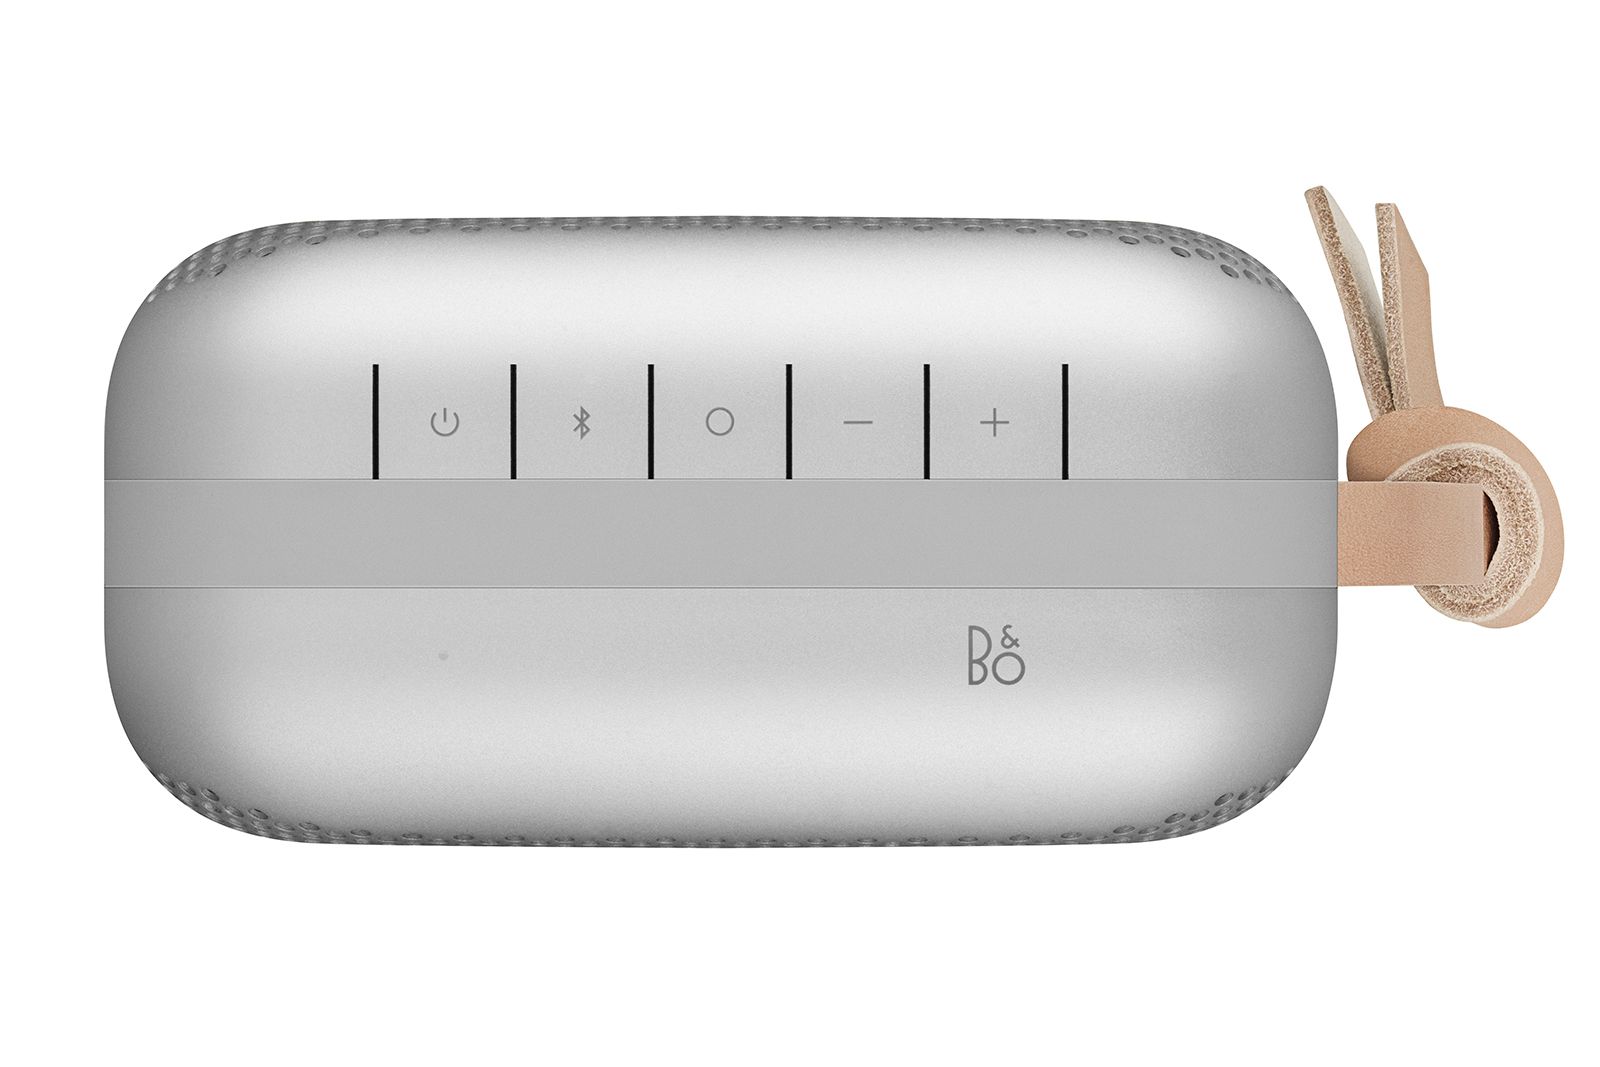 BO Play launches Beoplay P6 as a powerful portable Bluetooth speaker image 2